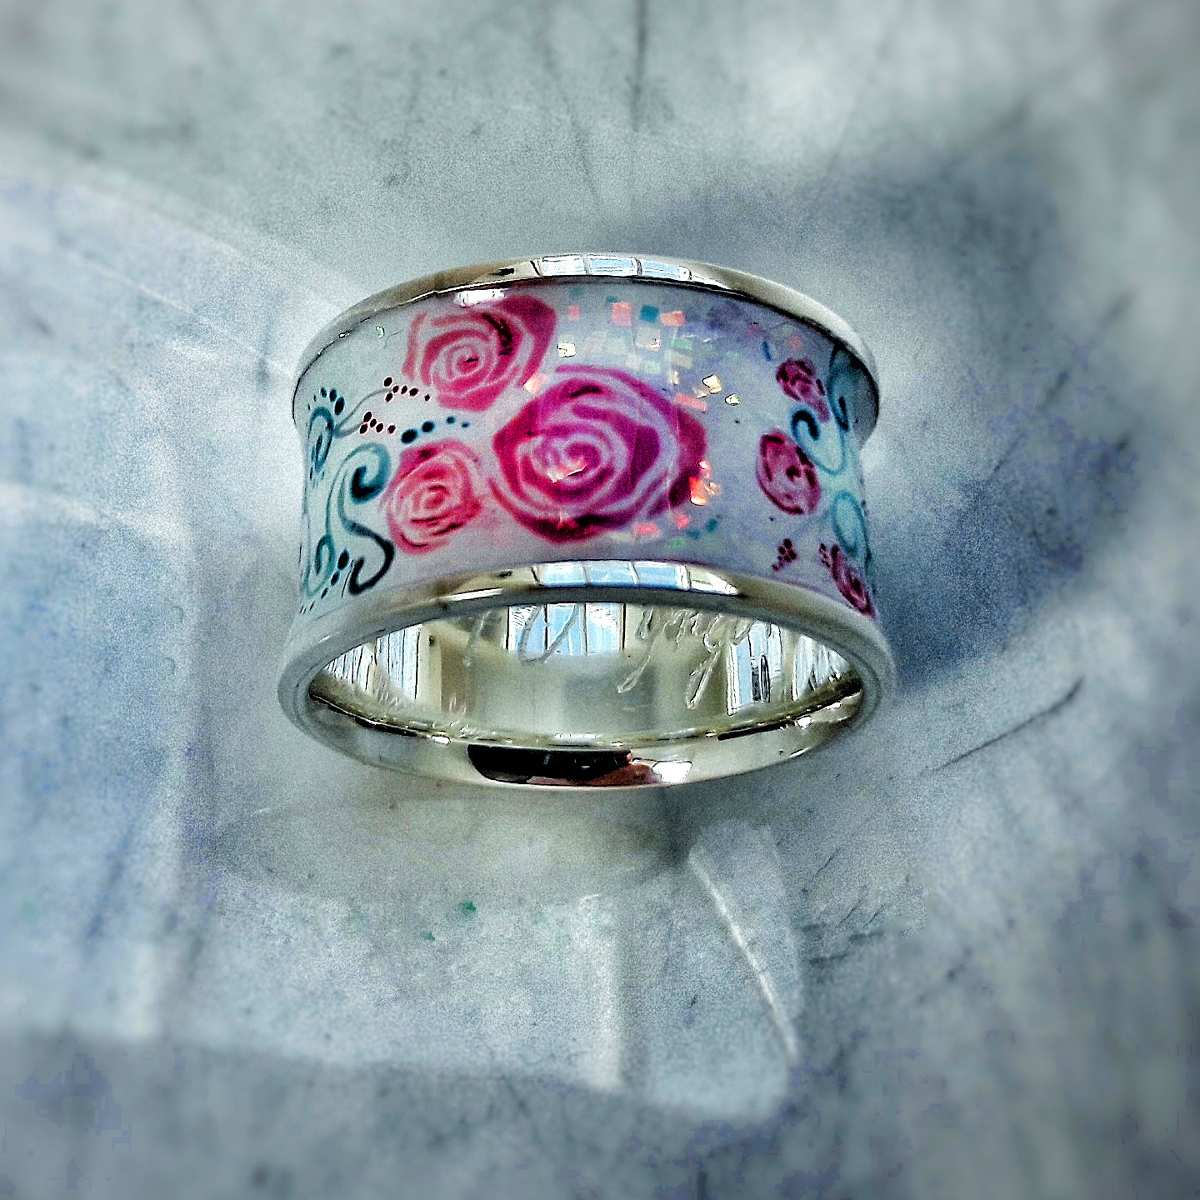 Ring with flowers